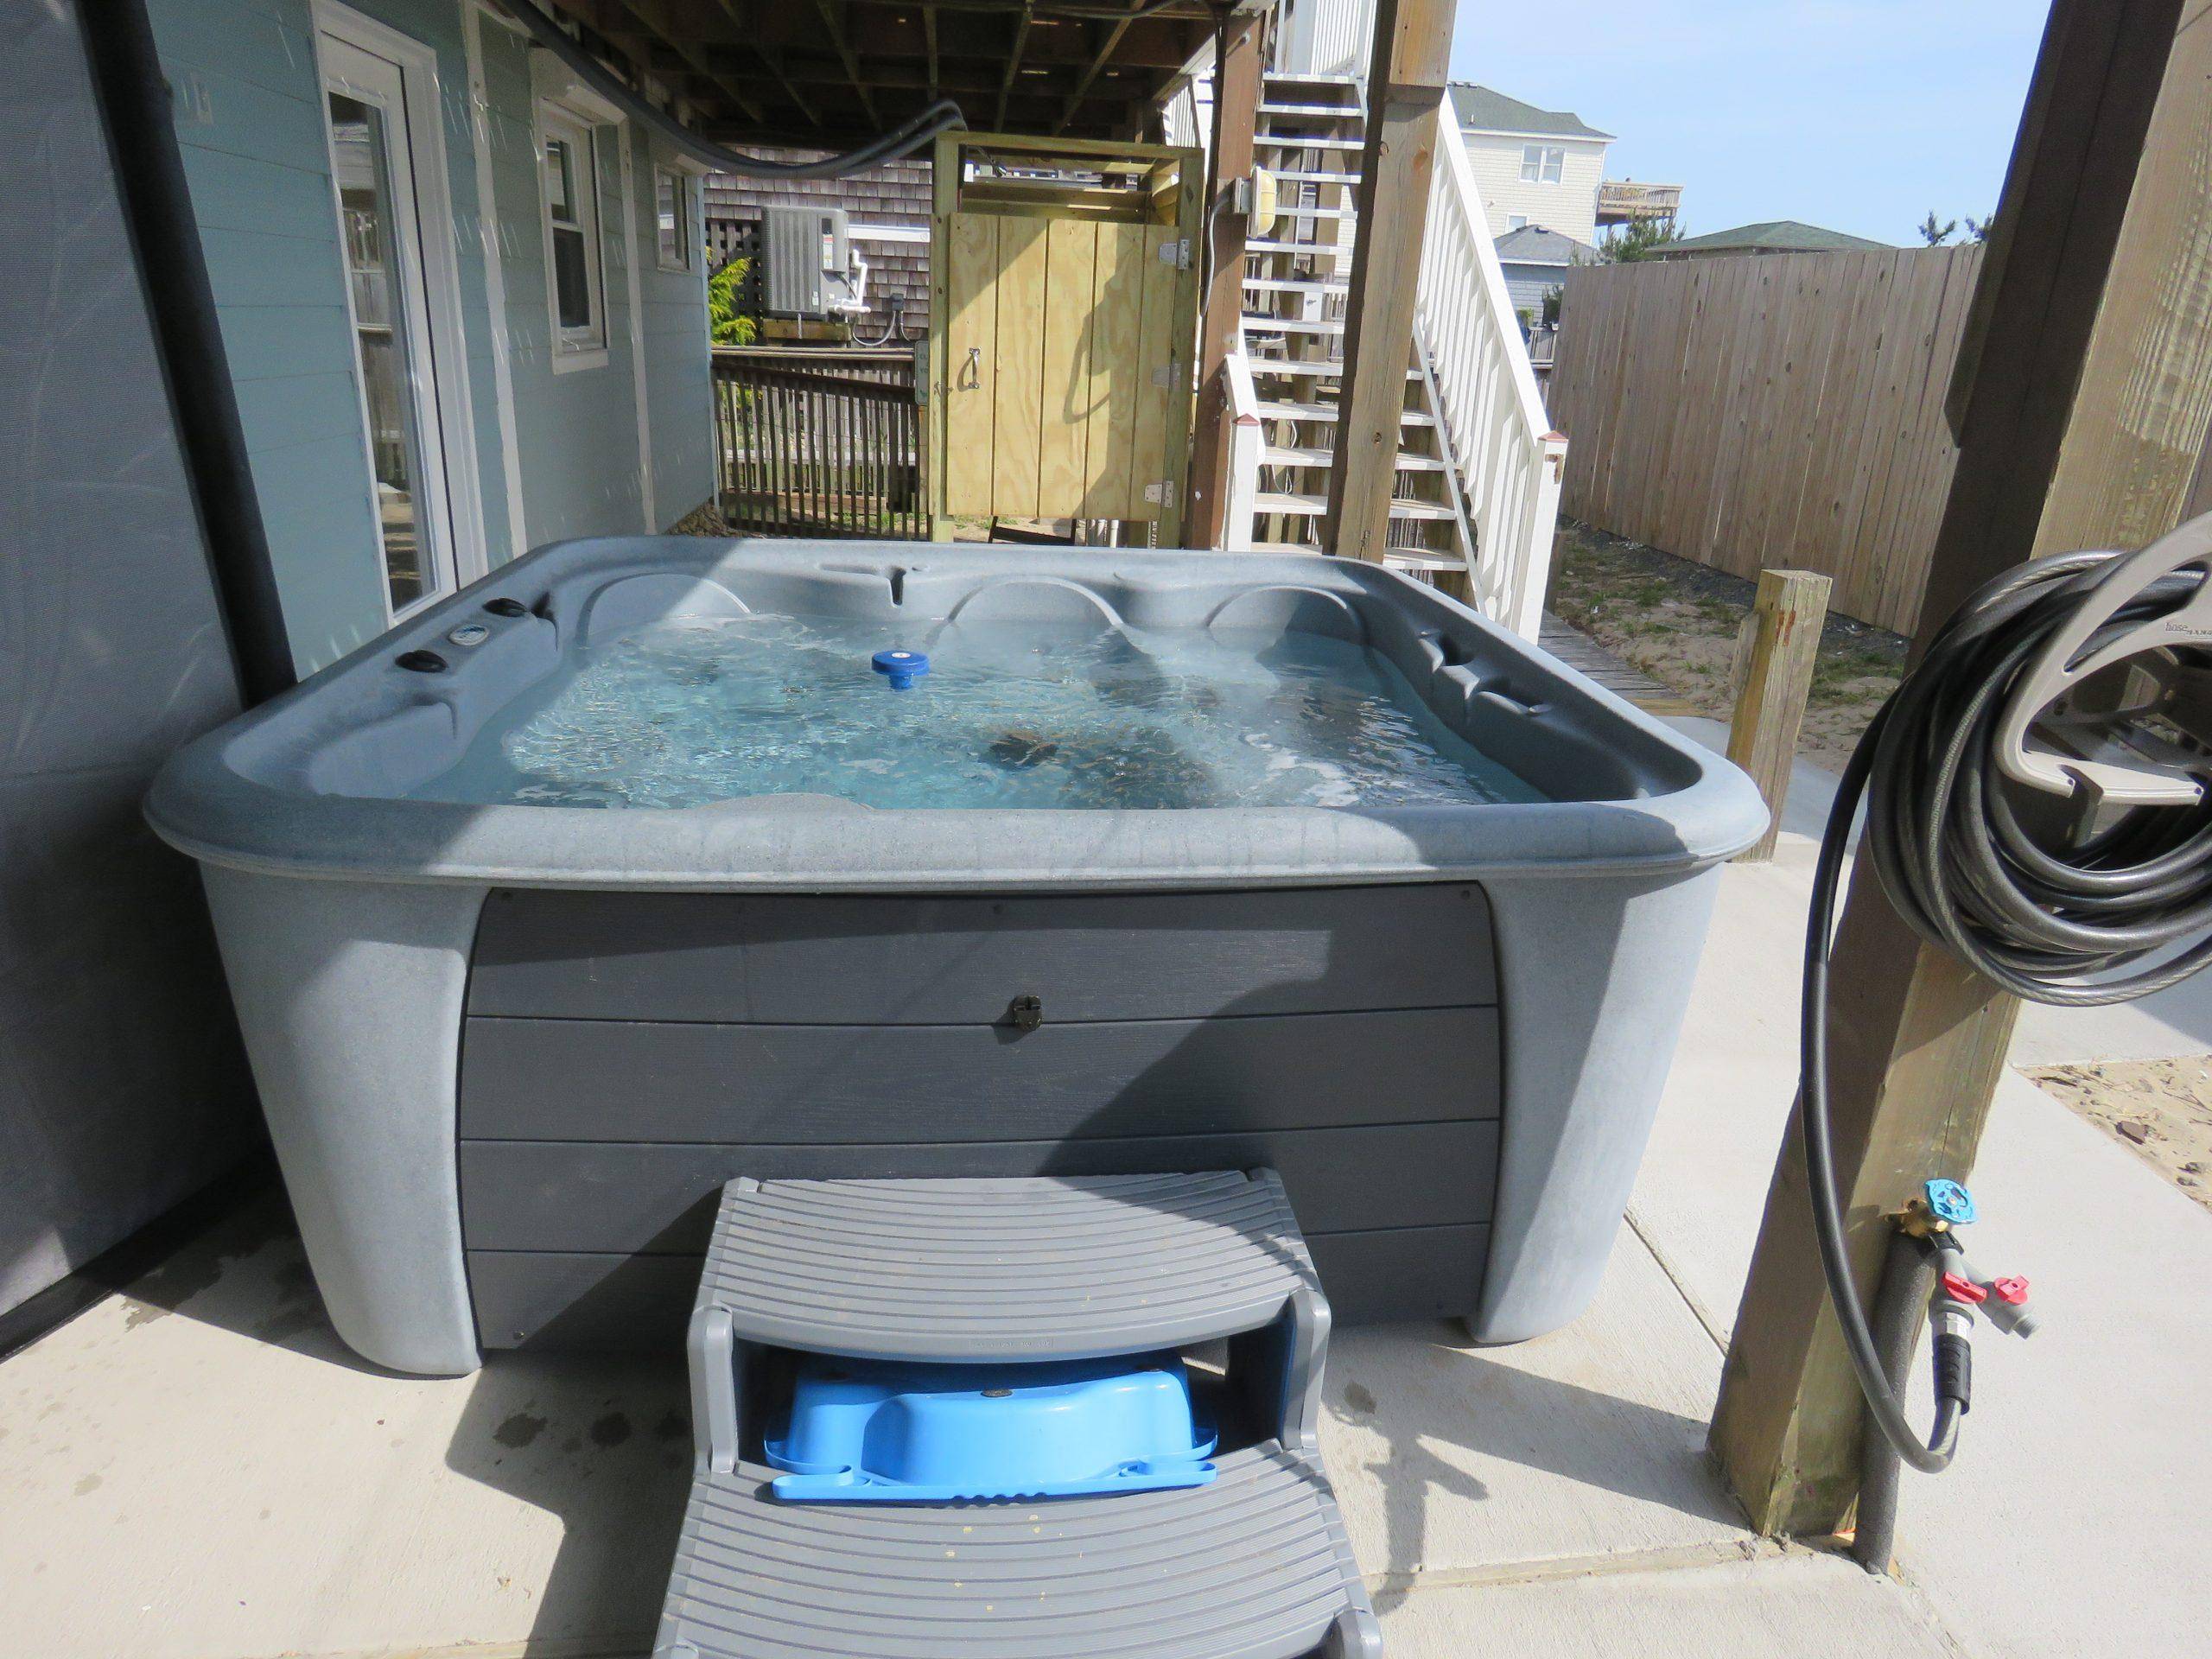 Take a Soak and Relax in the Jacuzzi Tub